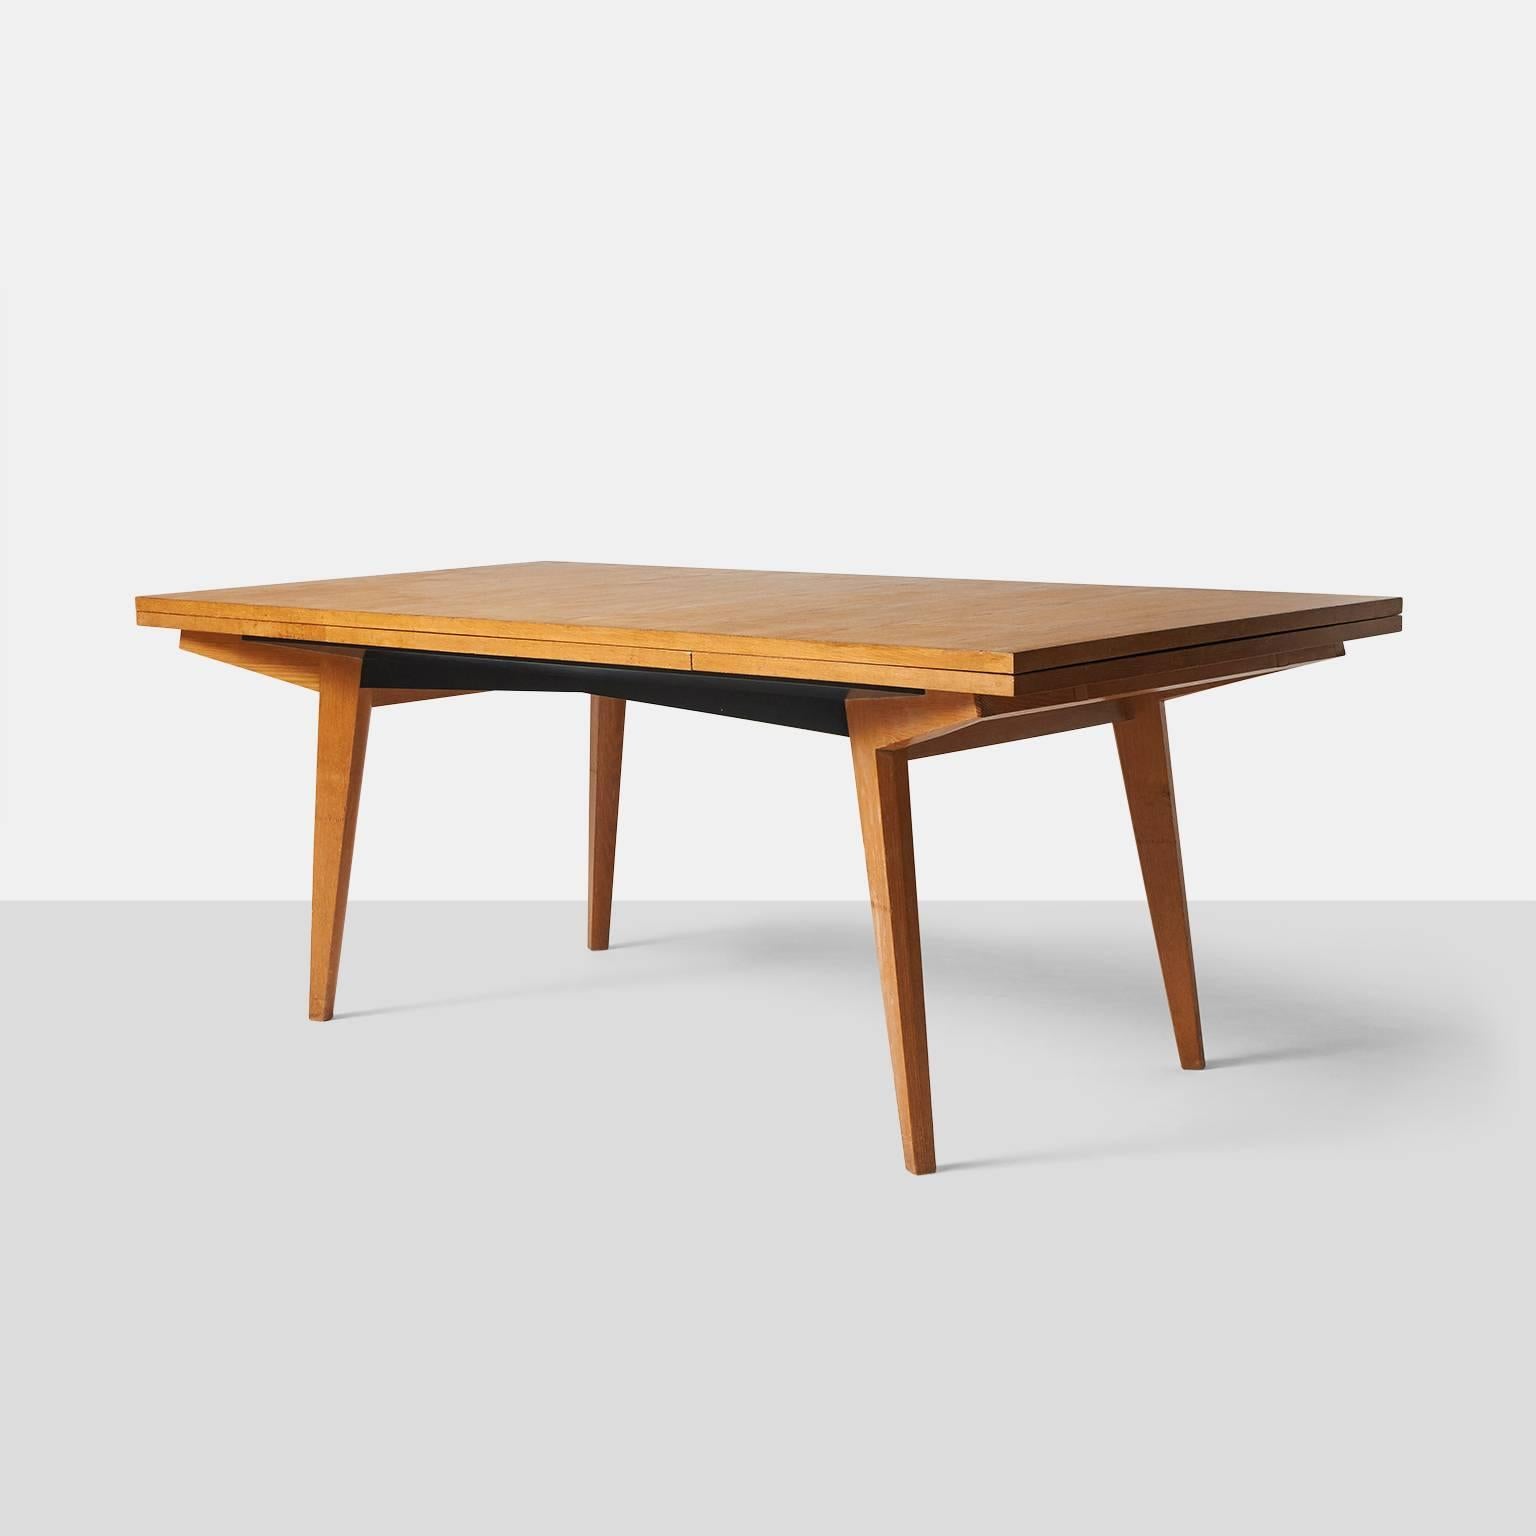 A dining table by Maxime Old in French oak with two leaves underneath that extend on each end to create a 120